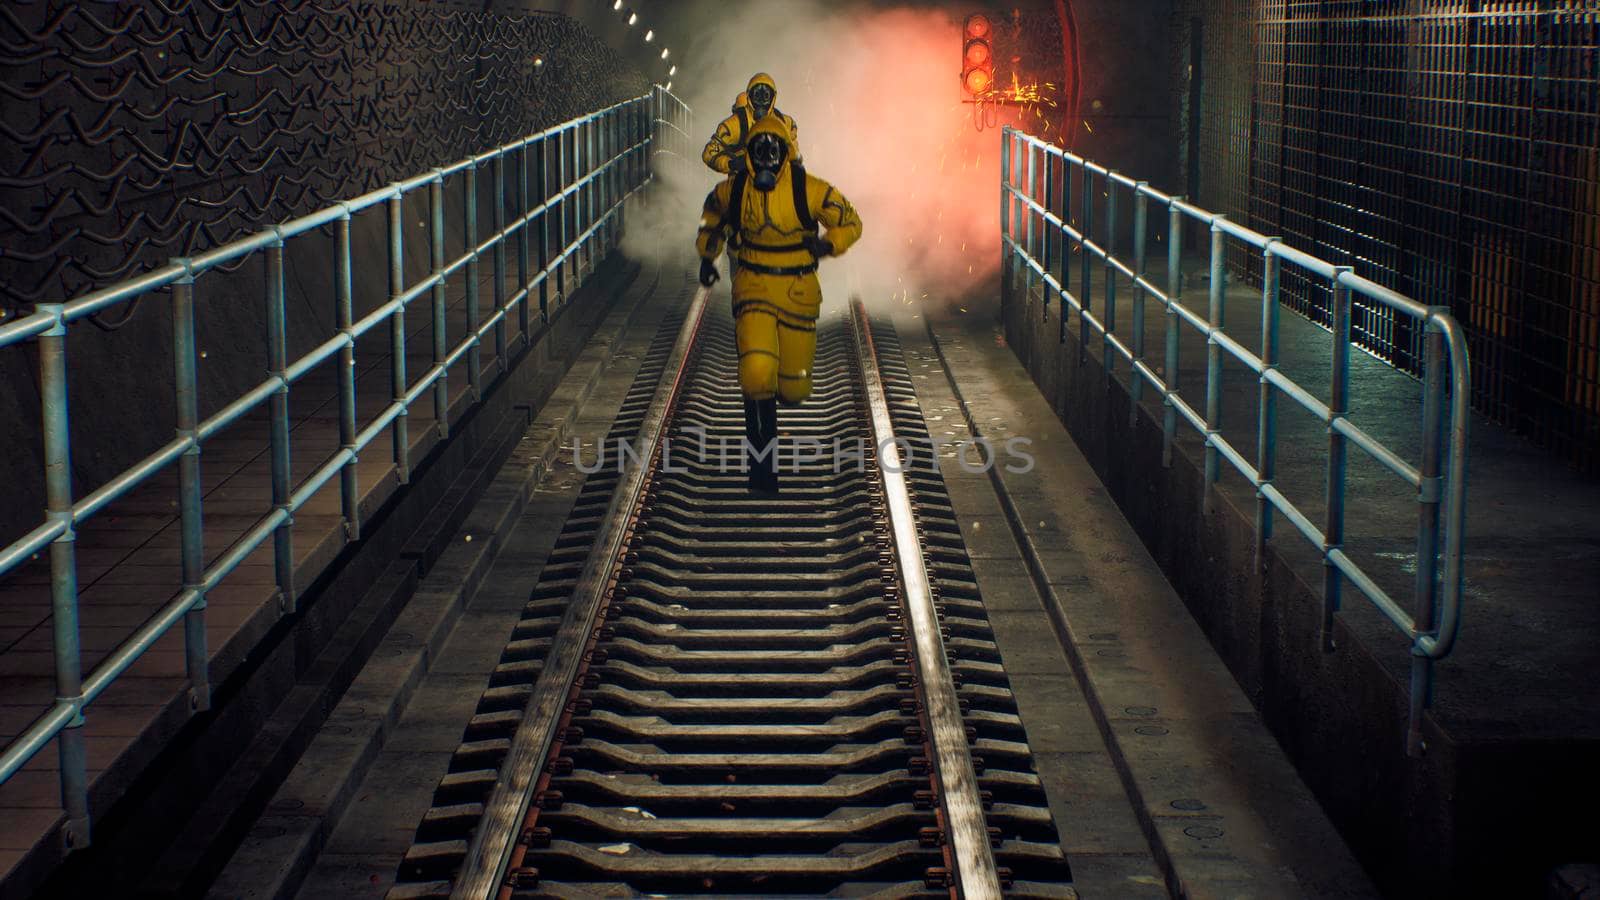 People in chemical protective clothing run out of the tunnel to go to fight the epidemic. The concept of a post-apocalyptic world after a global pandemic. 3D Rendering by designprojects